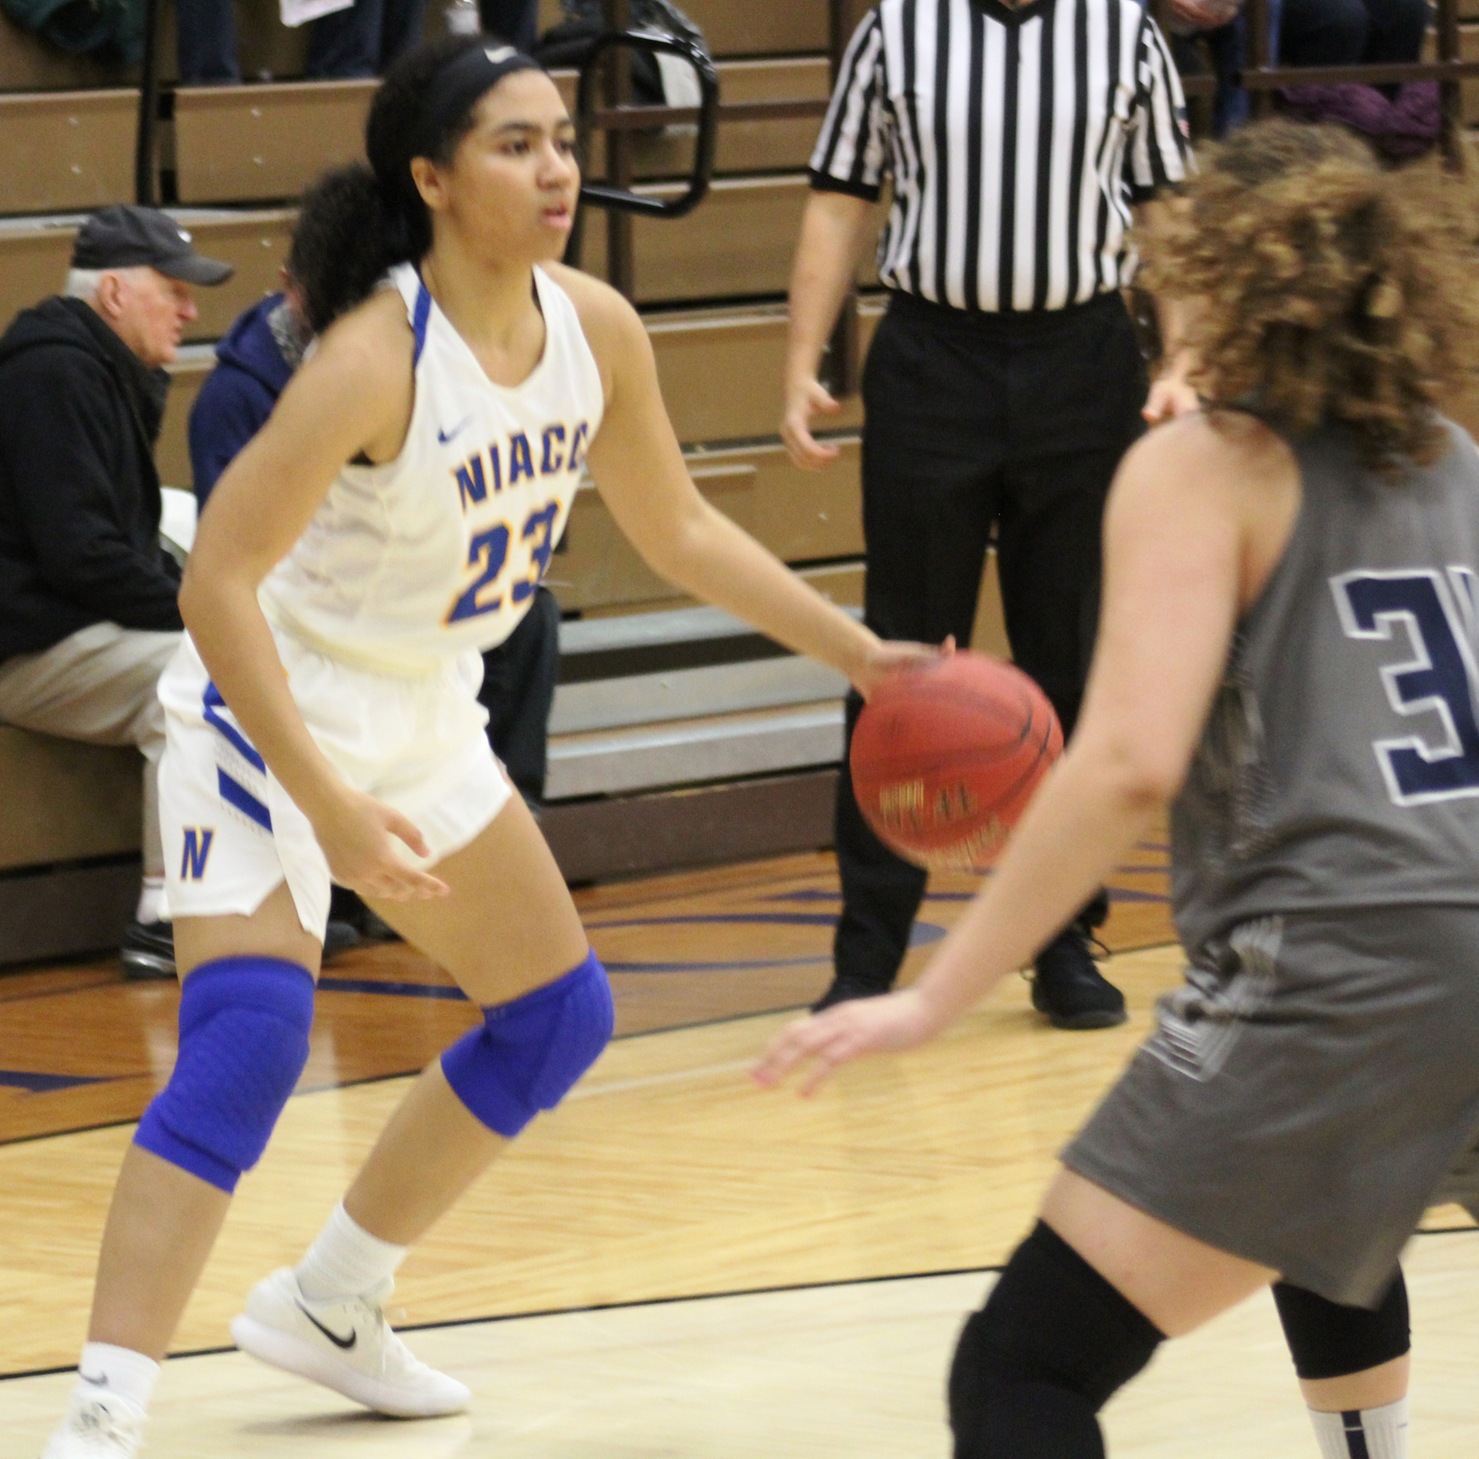 NIACC's Tayha Campeball is lone returning sophomore on the 2018-19 team.